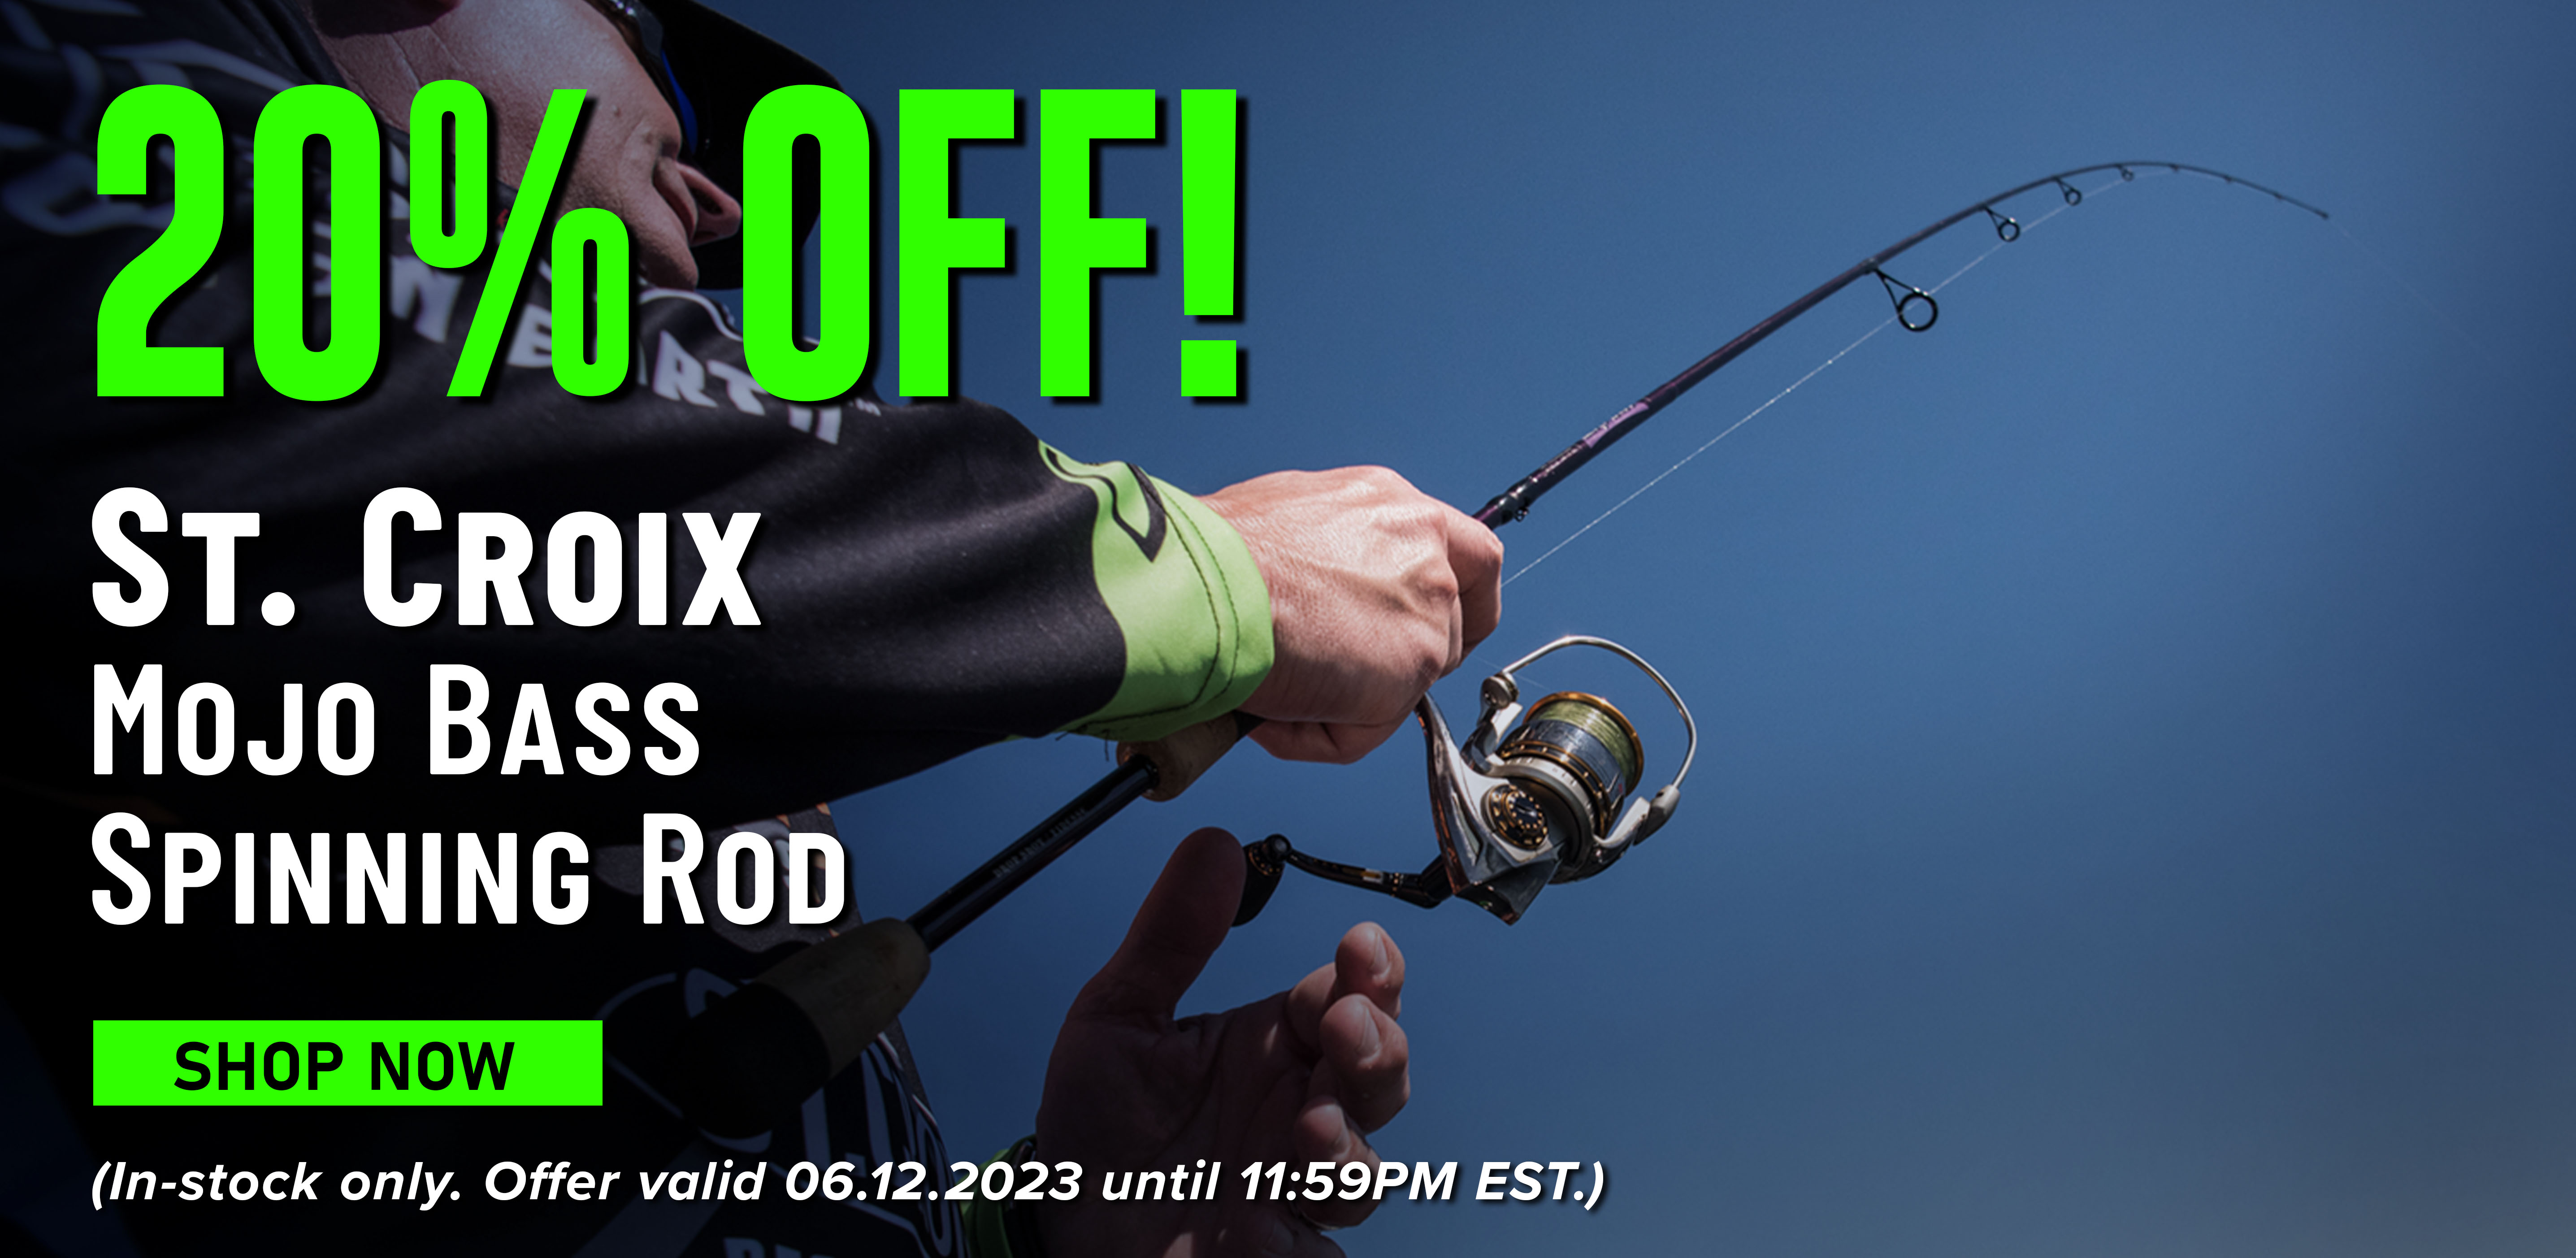 Shimano Stradic Spinning Reels 15% Off! These Won't Last Long